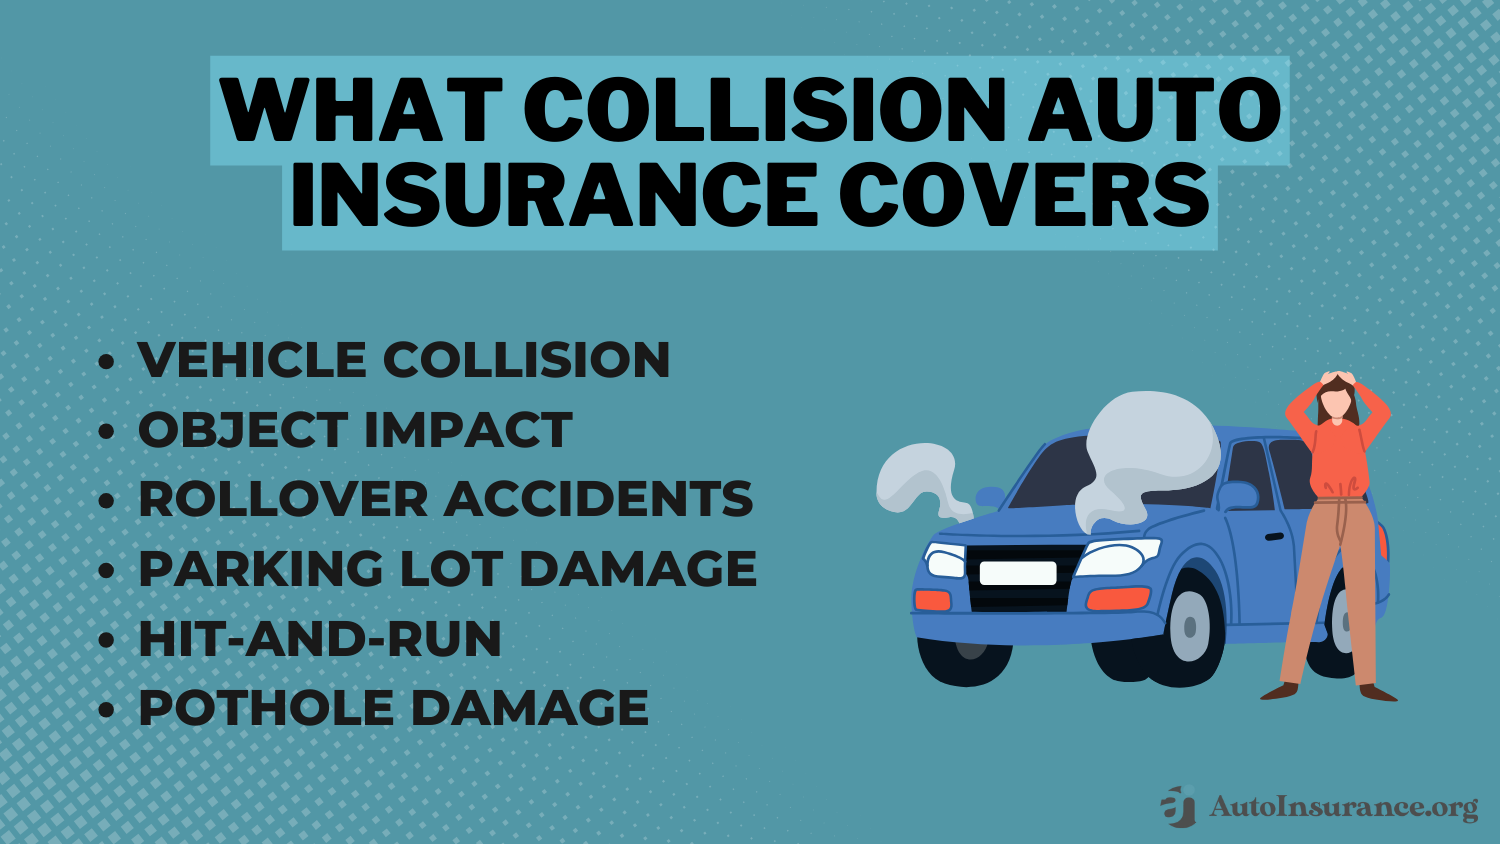 Collision Auto Insurance: What Collision Auto Insurance Covers Infographics